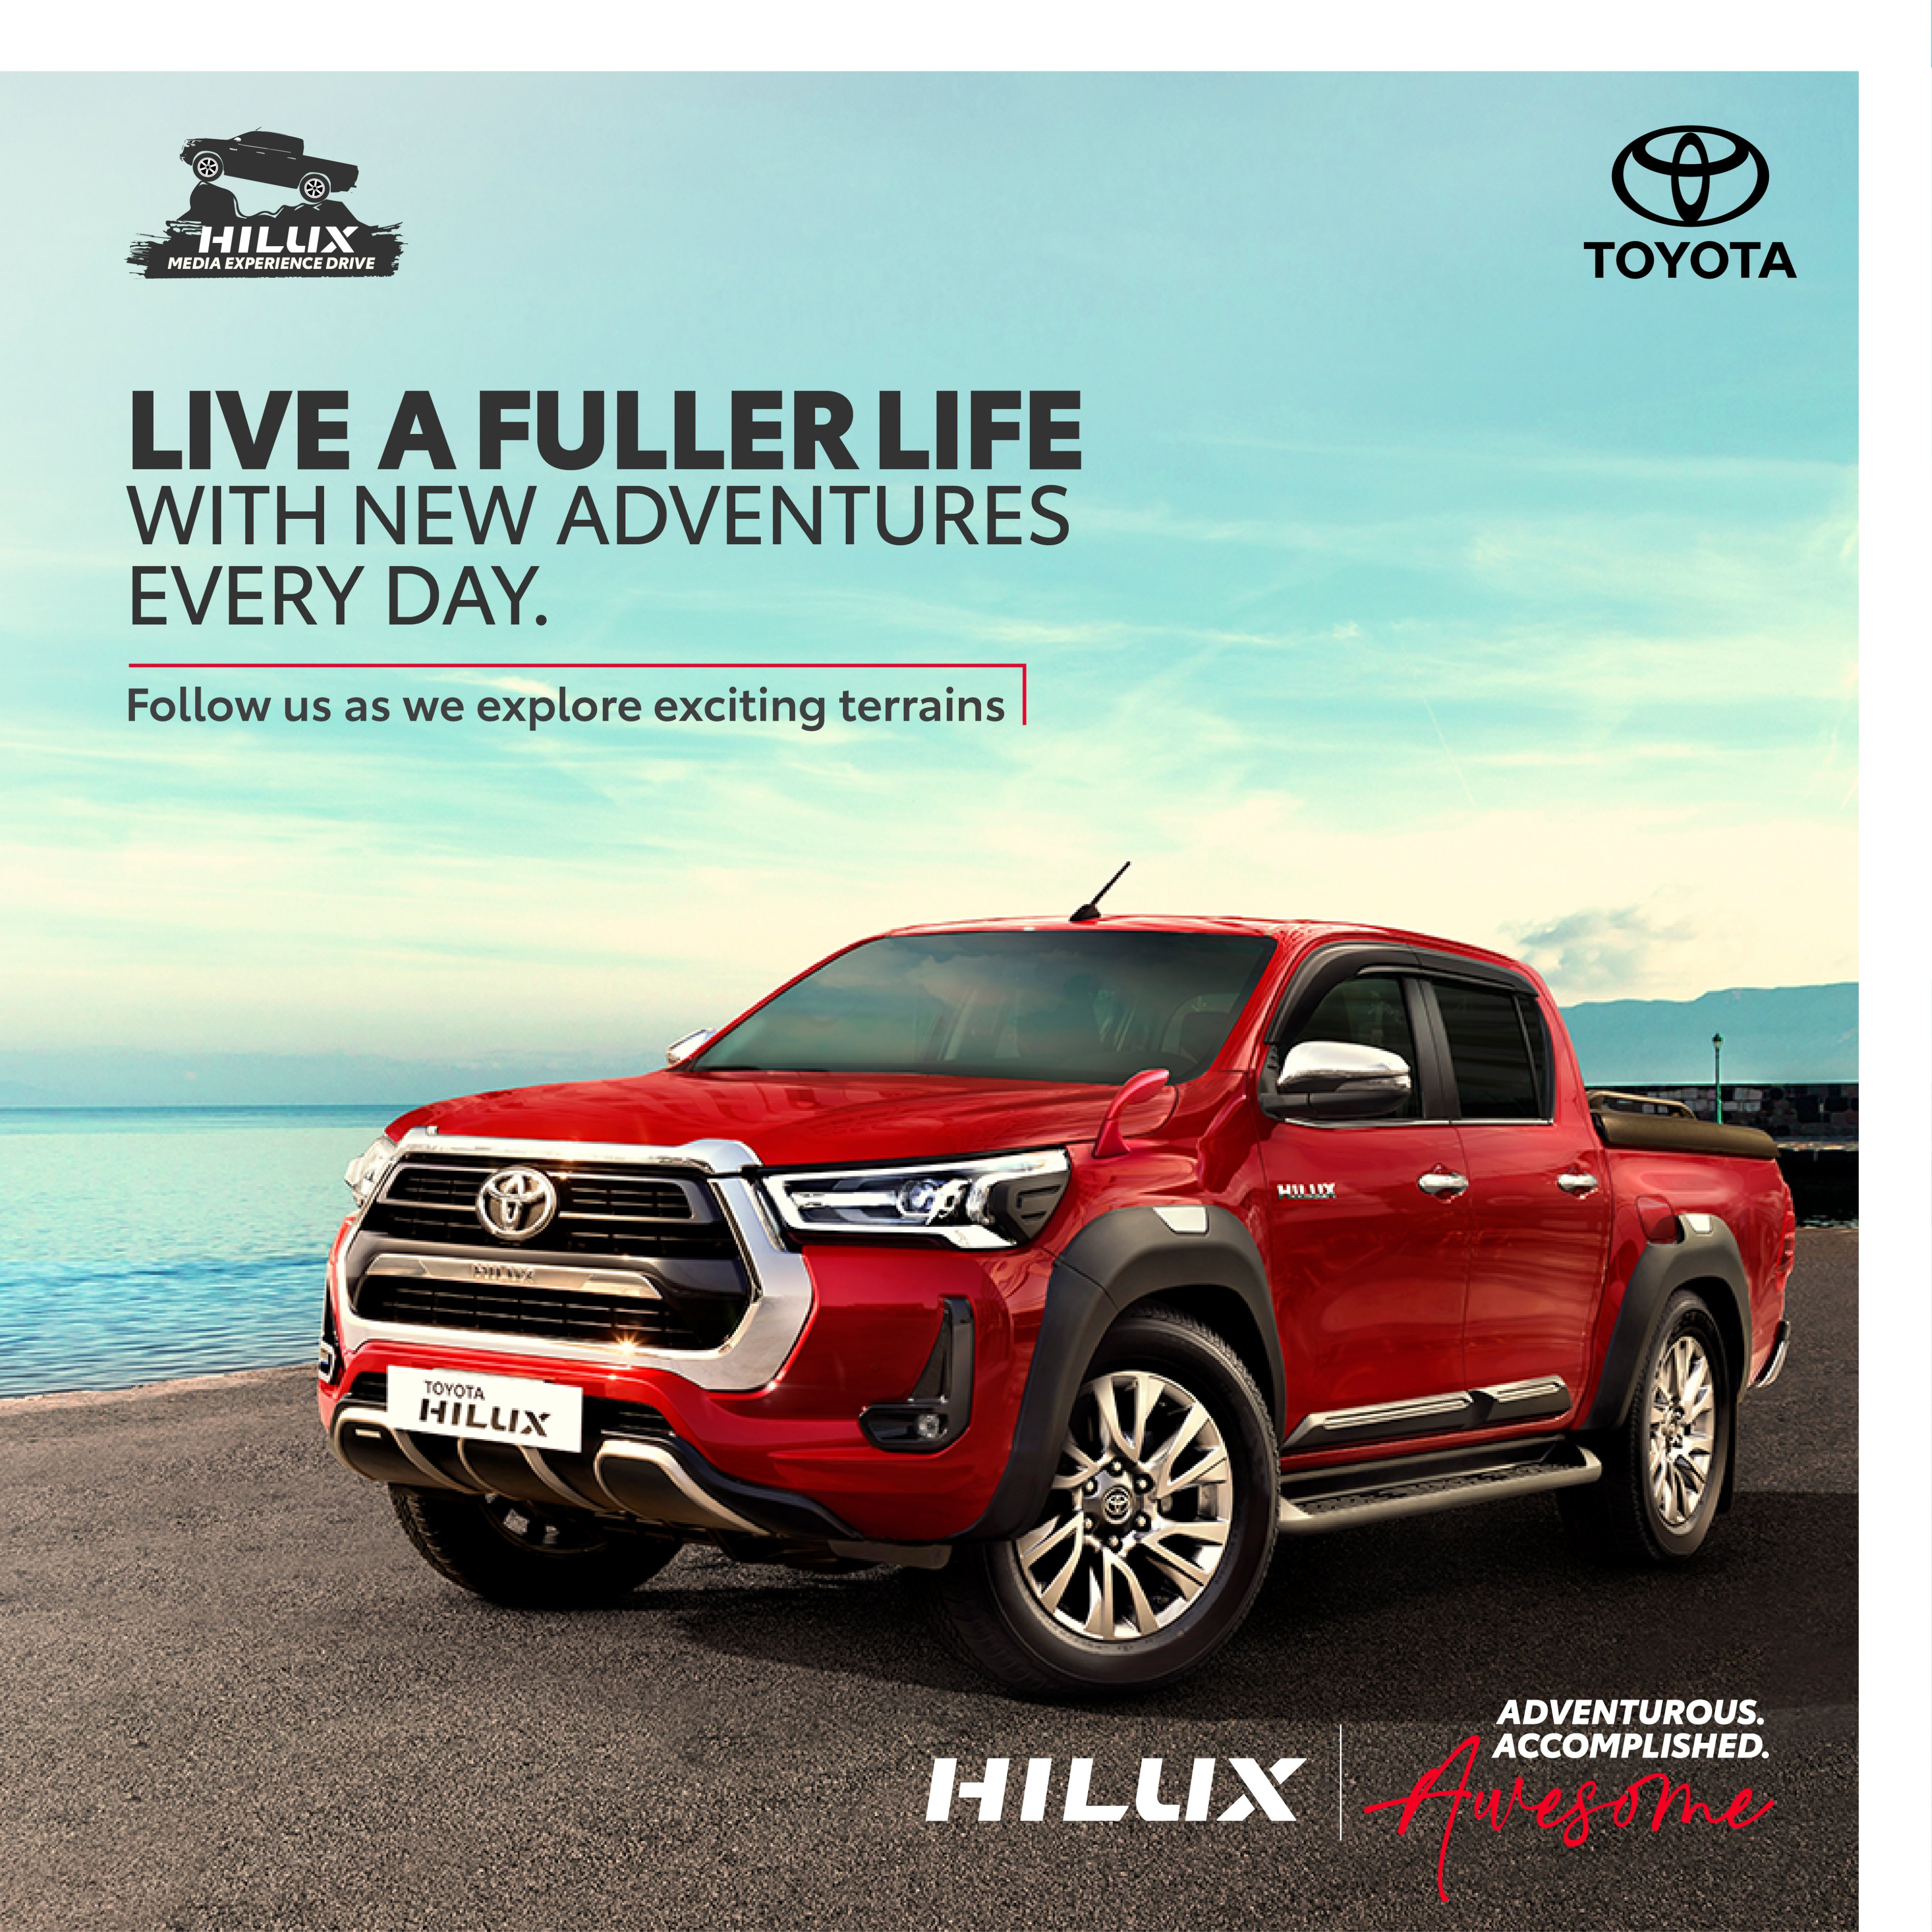 Toyota Hilux - Live a fuller life